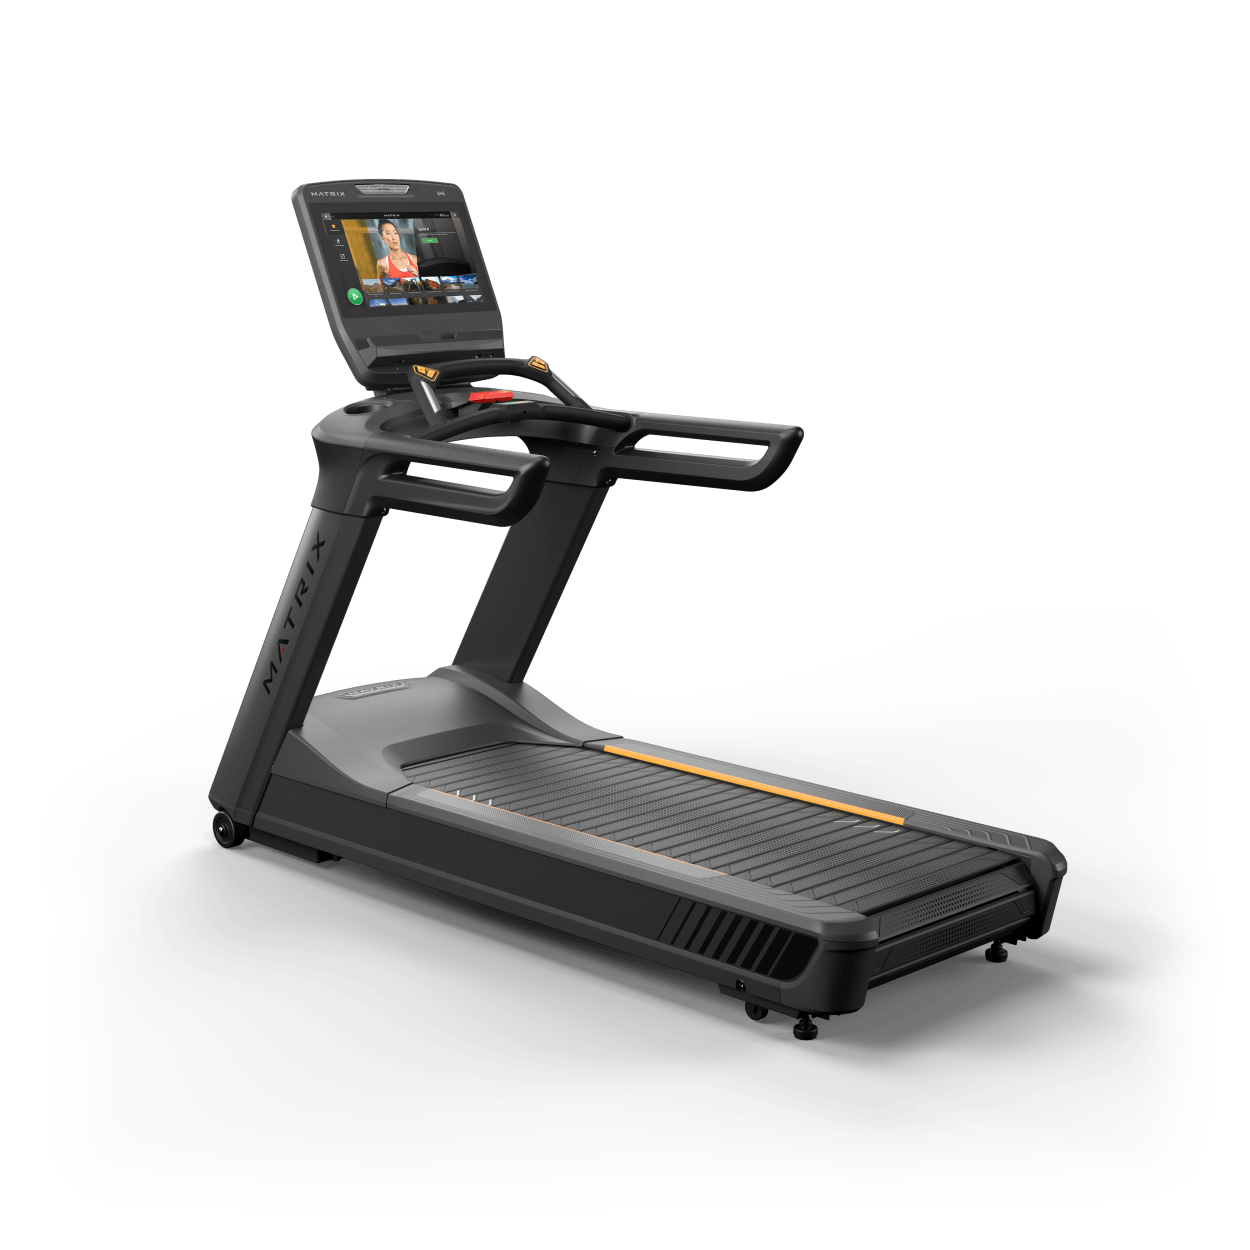 Matrix Performance Plus Treadmill with Touch XL Console full view | Fitness Experience